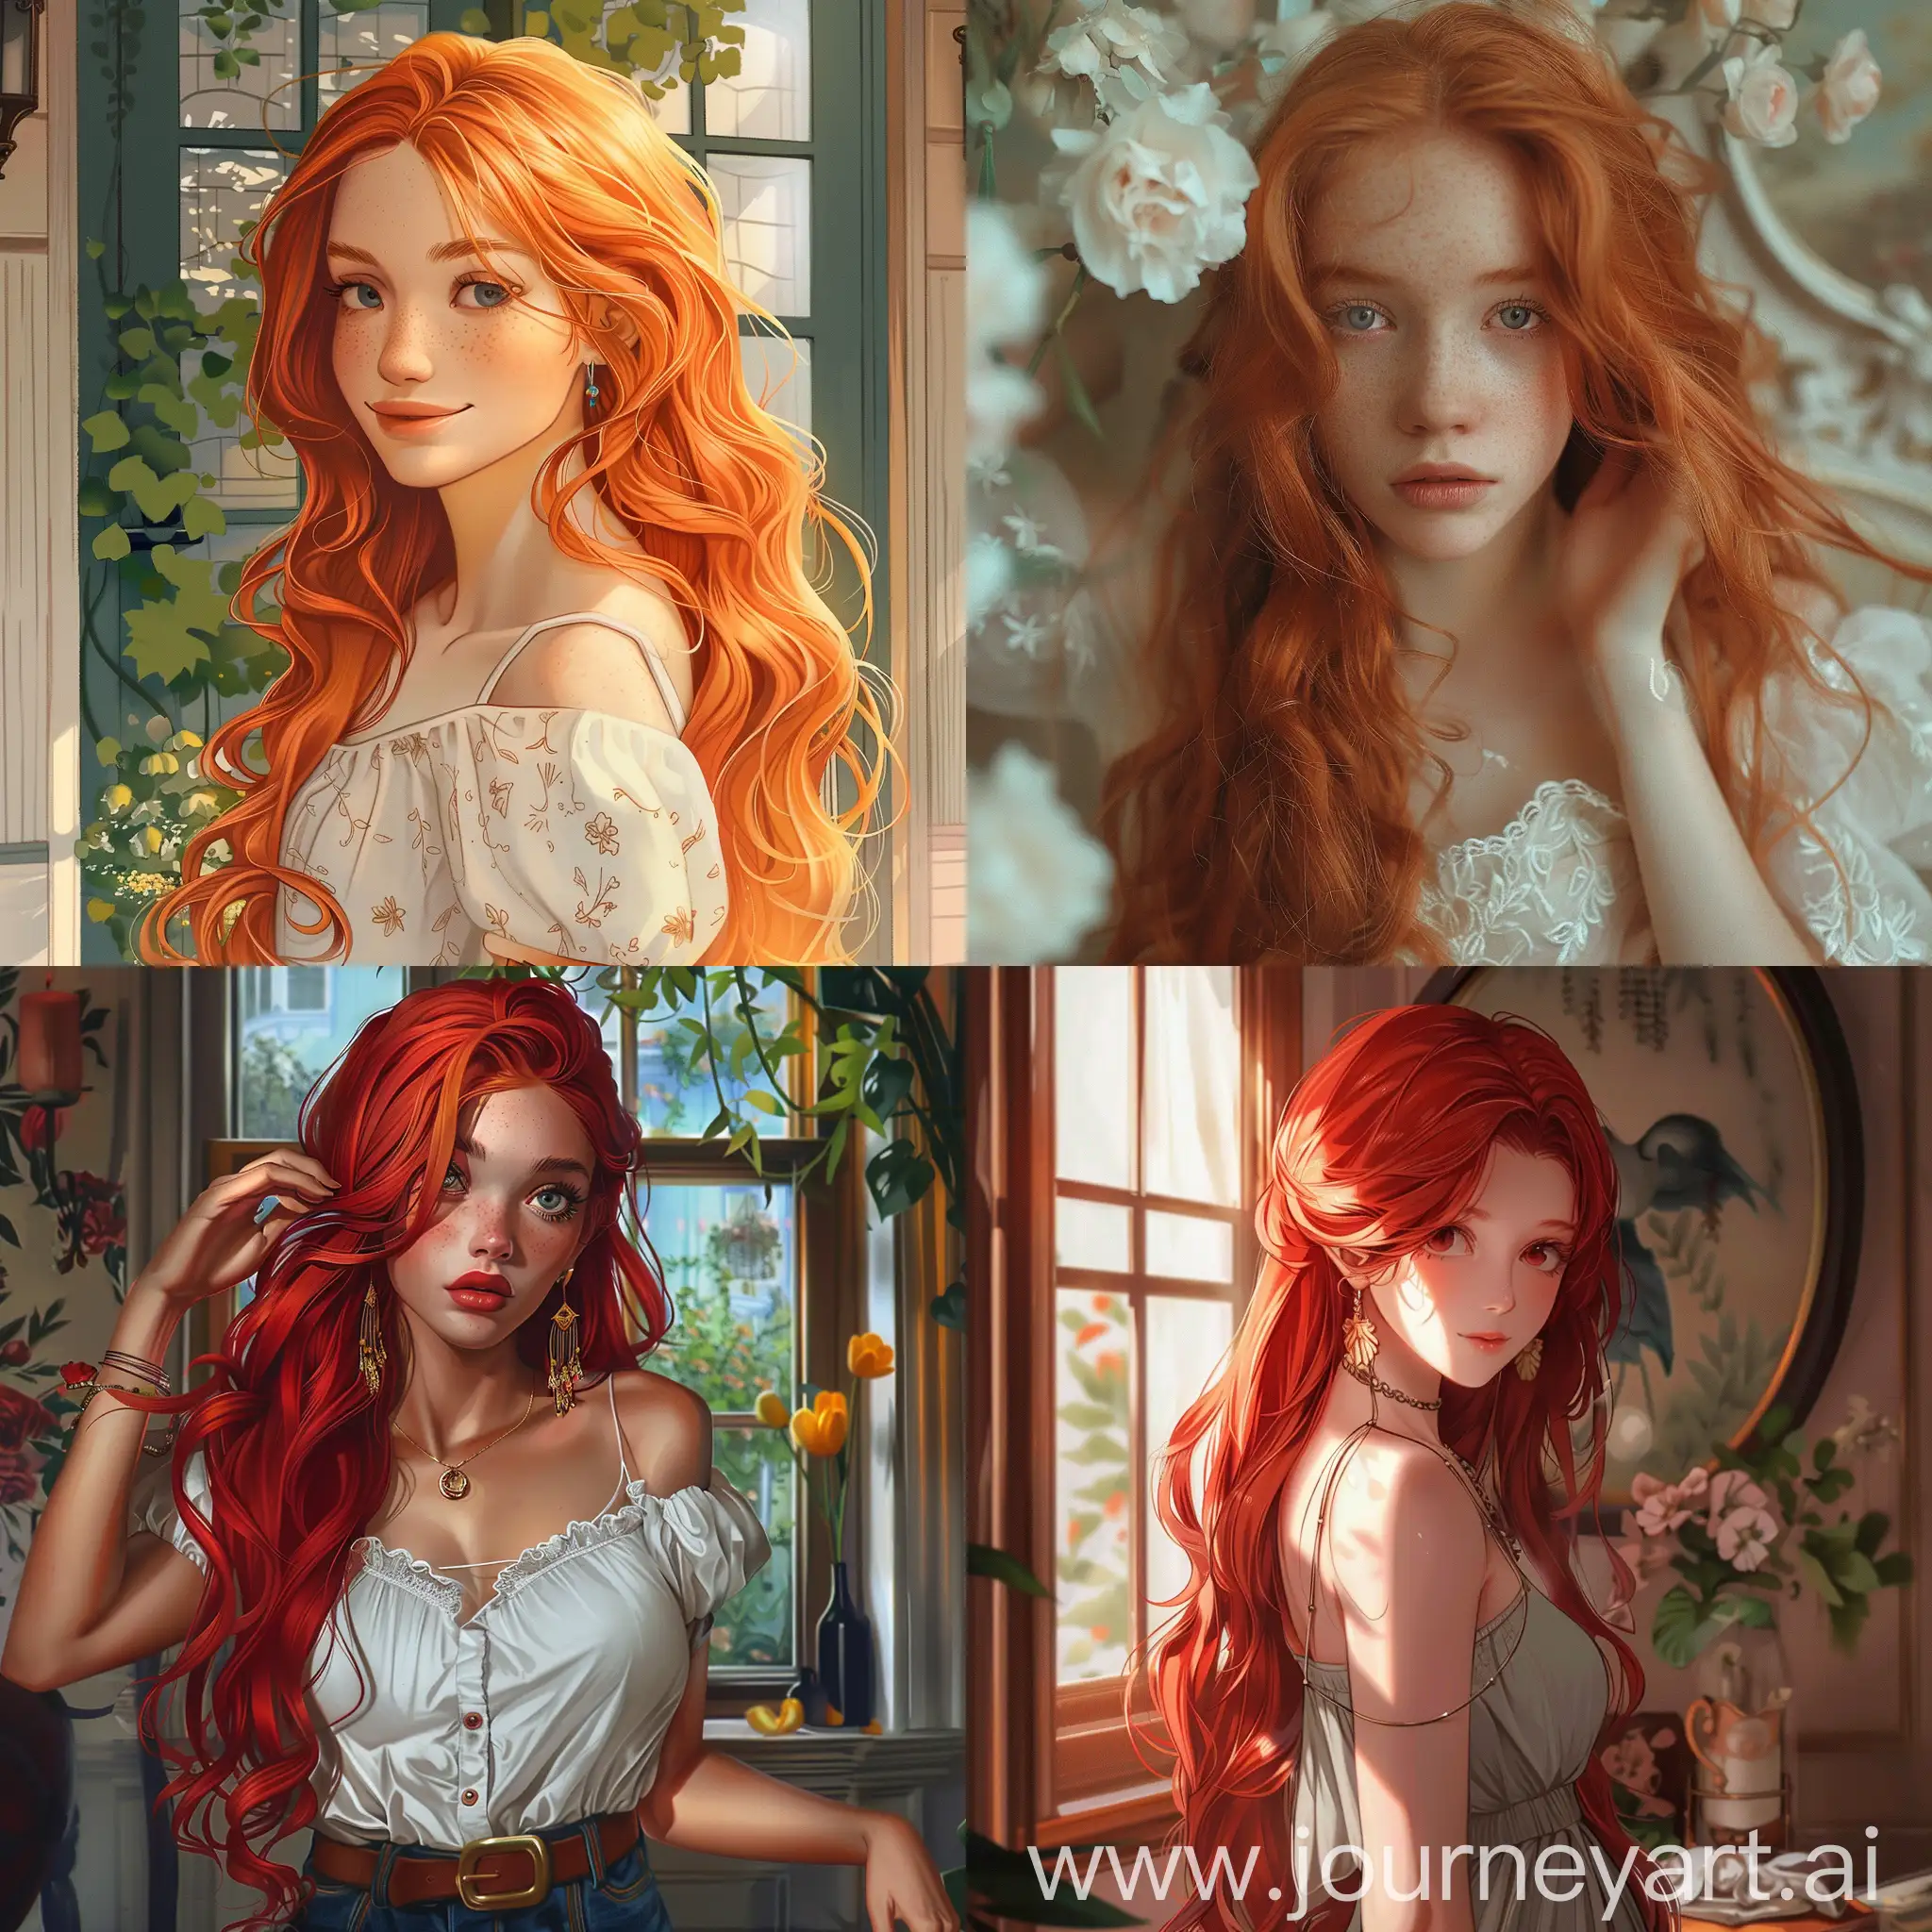 RedHaired-Girl-Adding-Charm-to-the-House